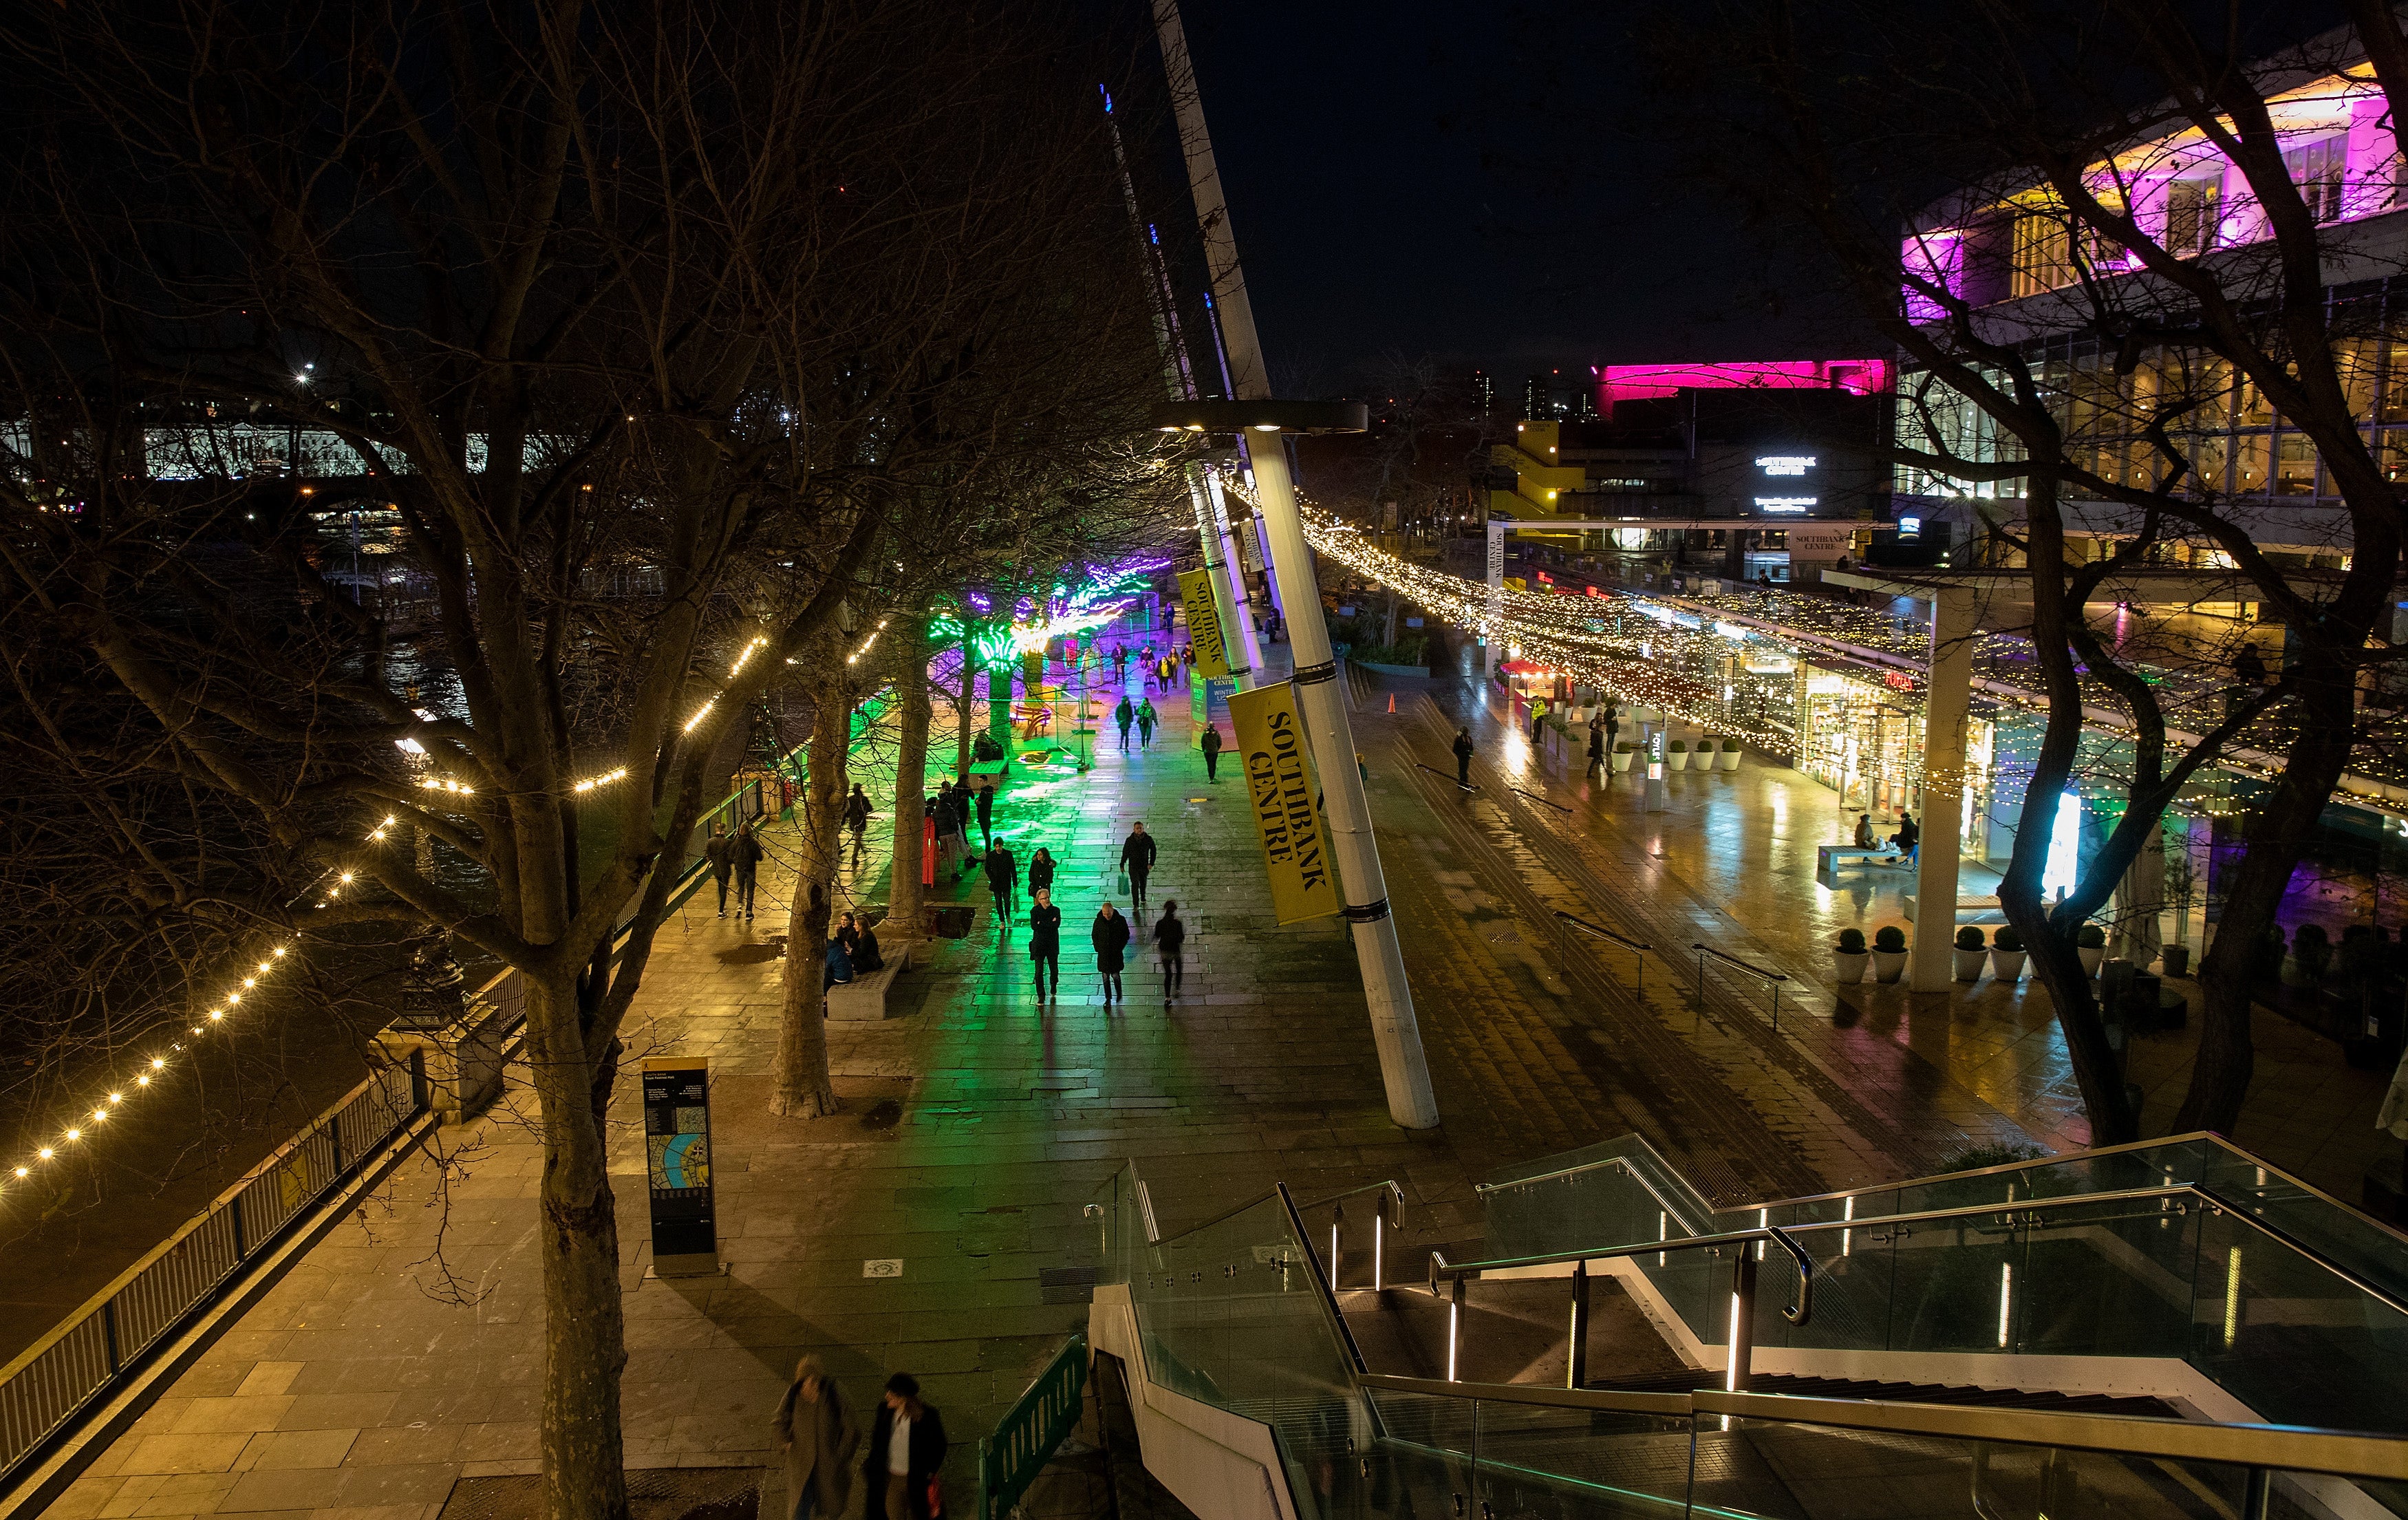 A view of people walking along Southbank lit with Christmas Lights during Tier 3 of the Covid-19 Pandemic Lockdown on 17 December 2020 in London.